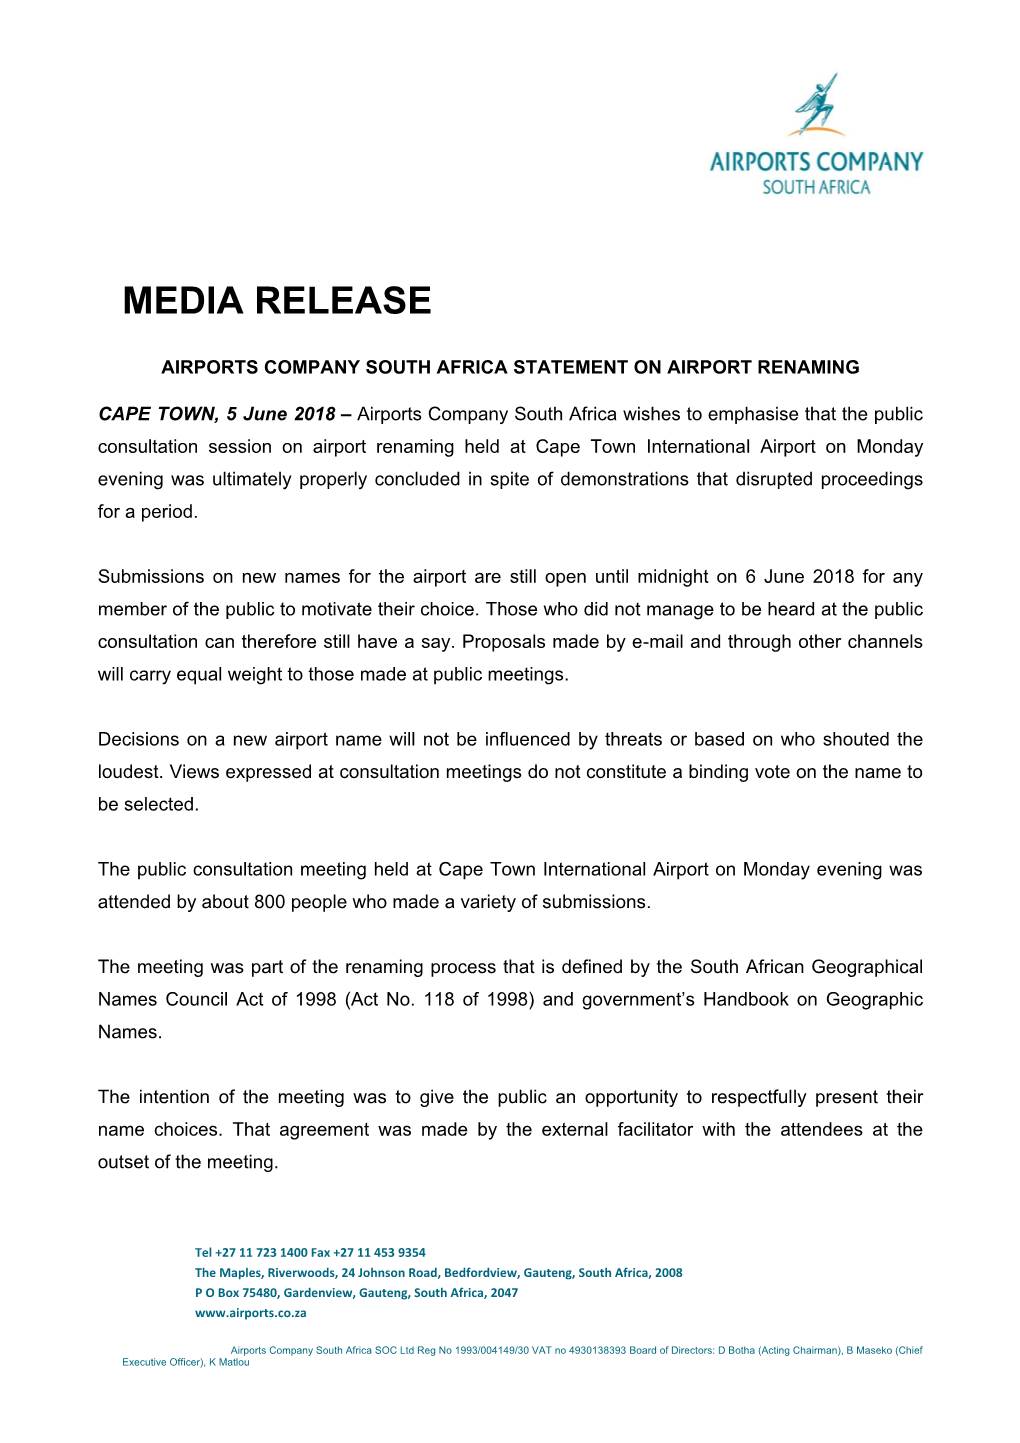 Airports Company South Africa Statement on Airport Renaming